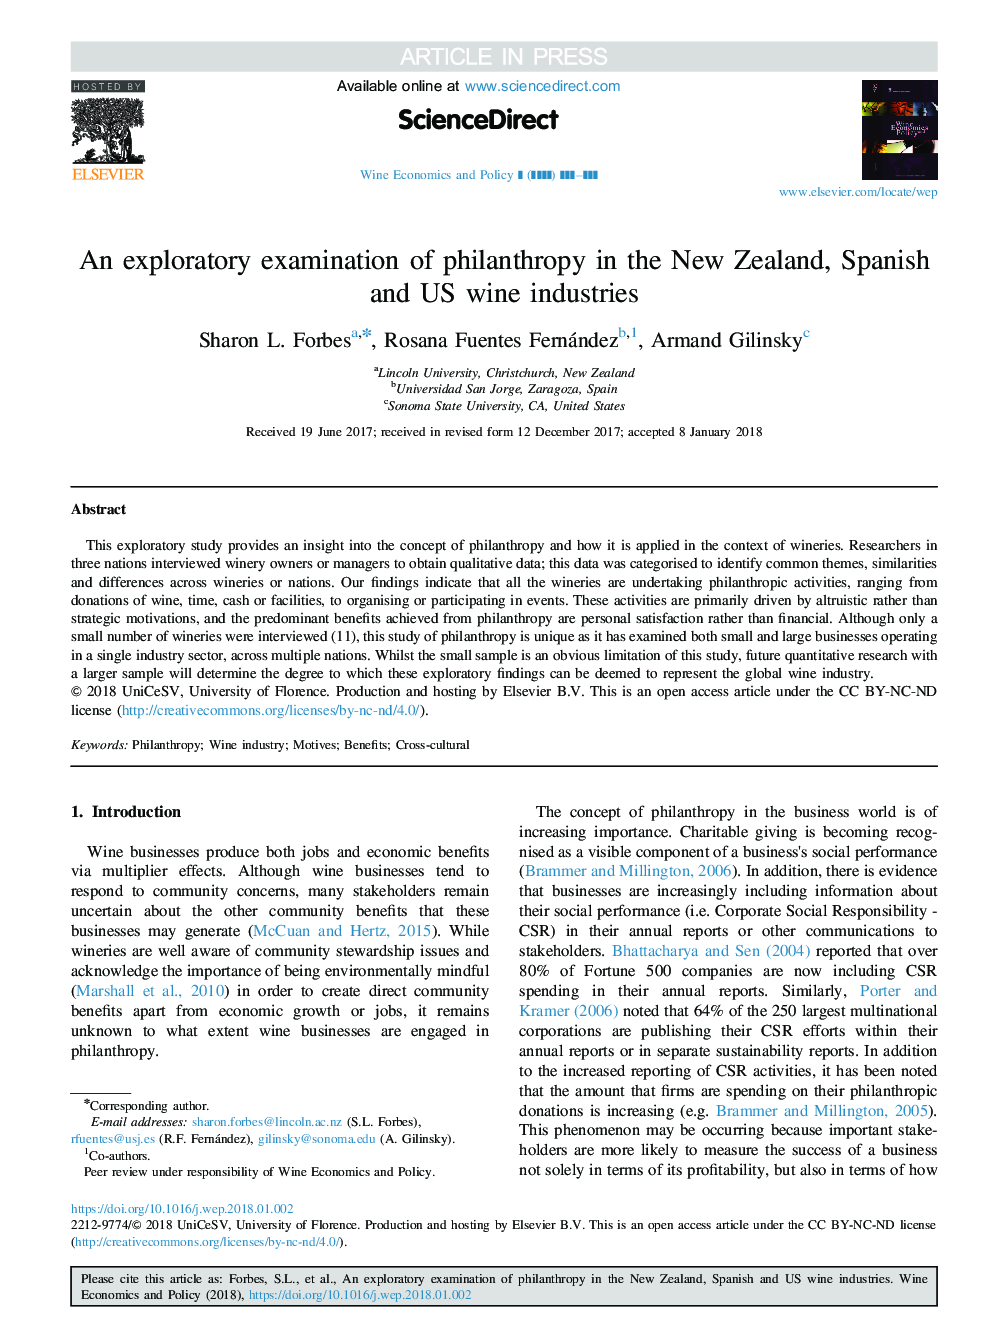 An exploratory examination of philanthropy in the New Zealand, Spanish and US wine industries